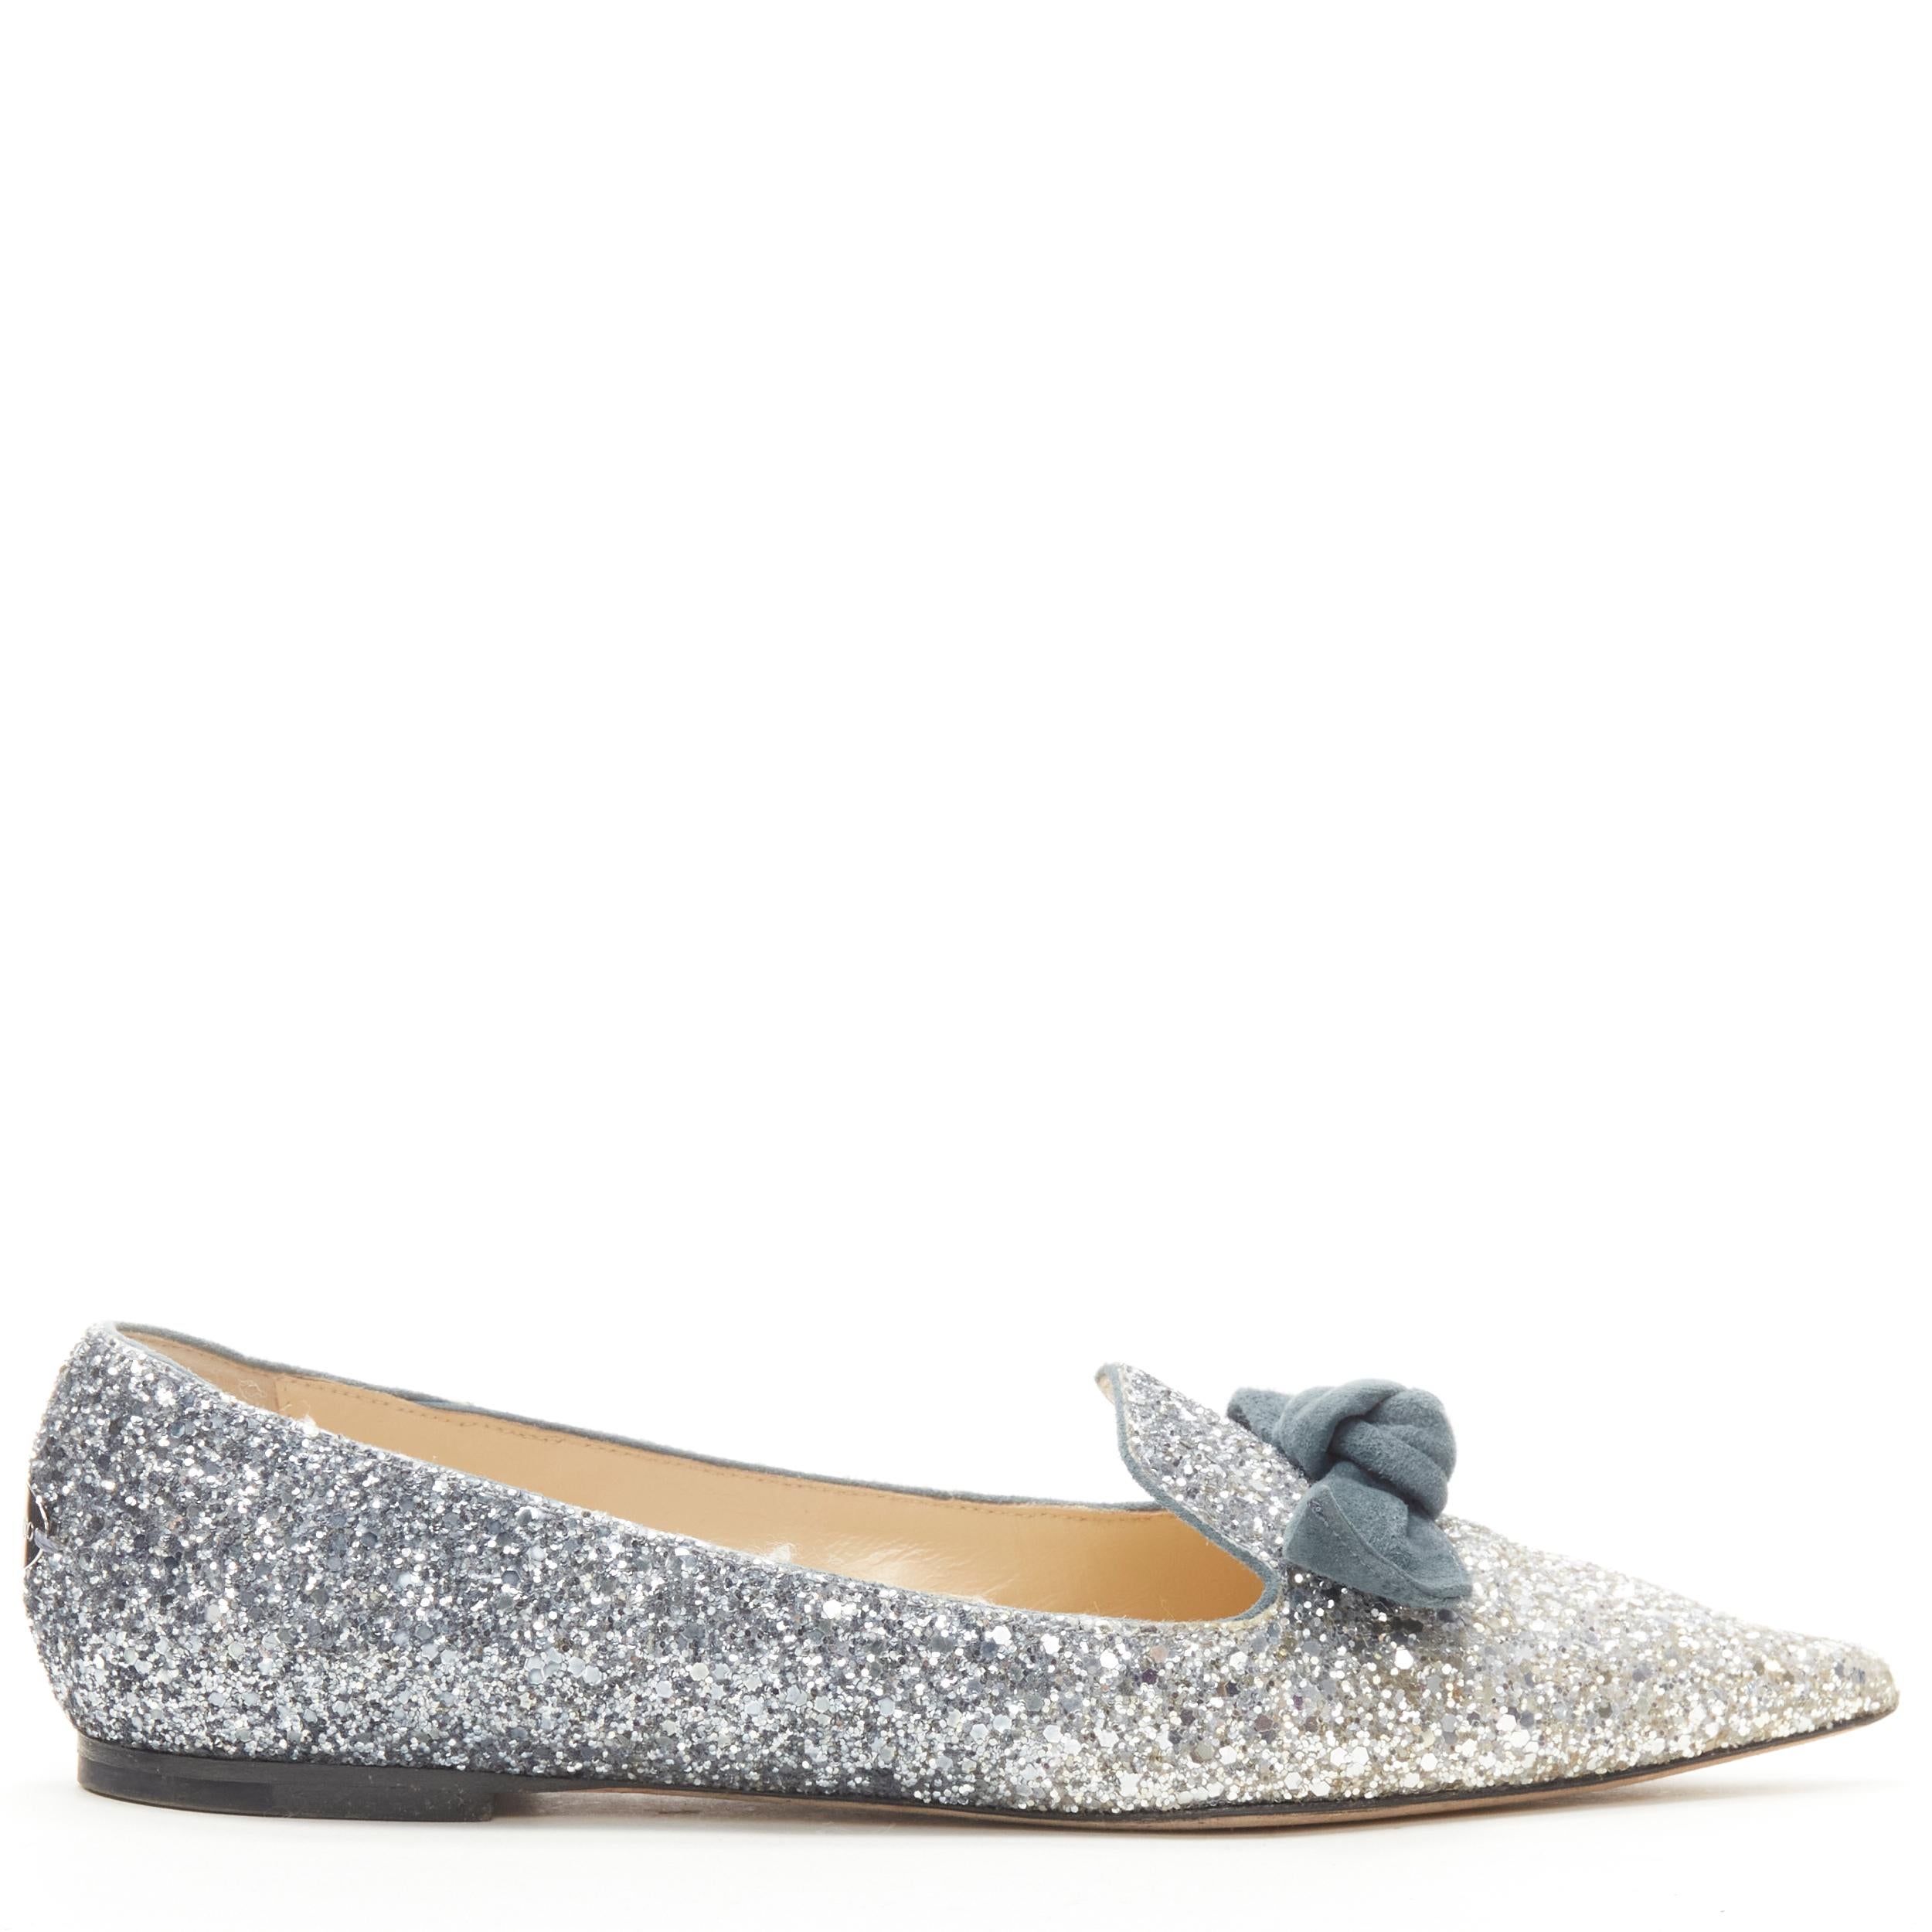 JIMMY CHOO blue silver degrade gradinet course glitter suede bow flats EU38 
Reference: JACG/A00061 
Brand: Jimmy Choo 
Material: Glitter 
Color: Silver 
Pattern: Solid 
Extra Detail: Suede tie bow. Jimmy Choo logo plate at heel.
Made in: Italy